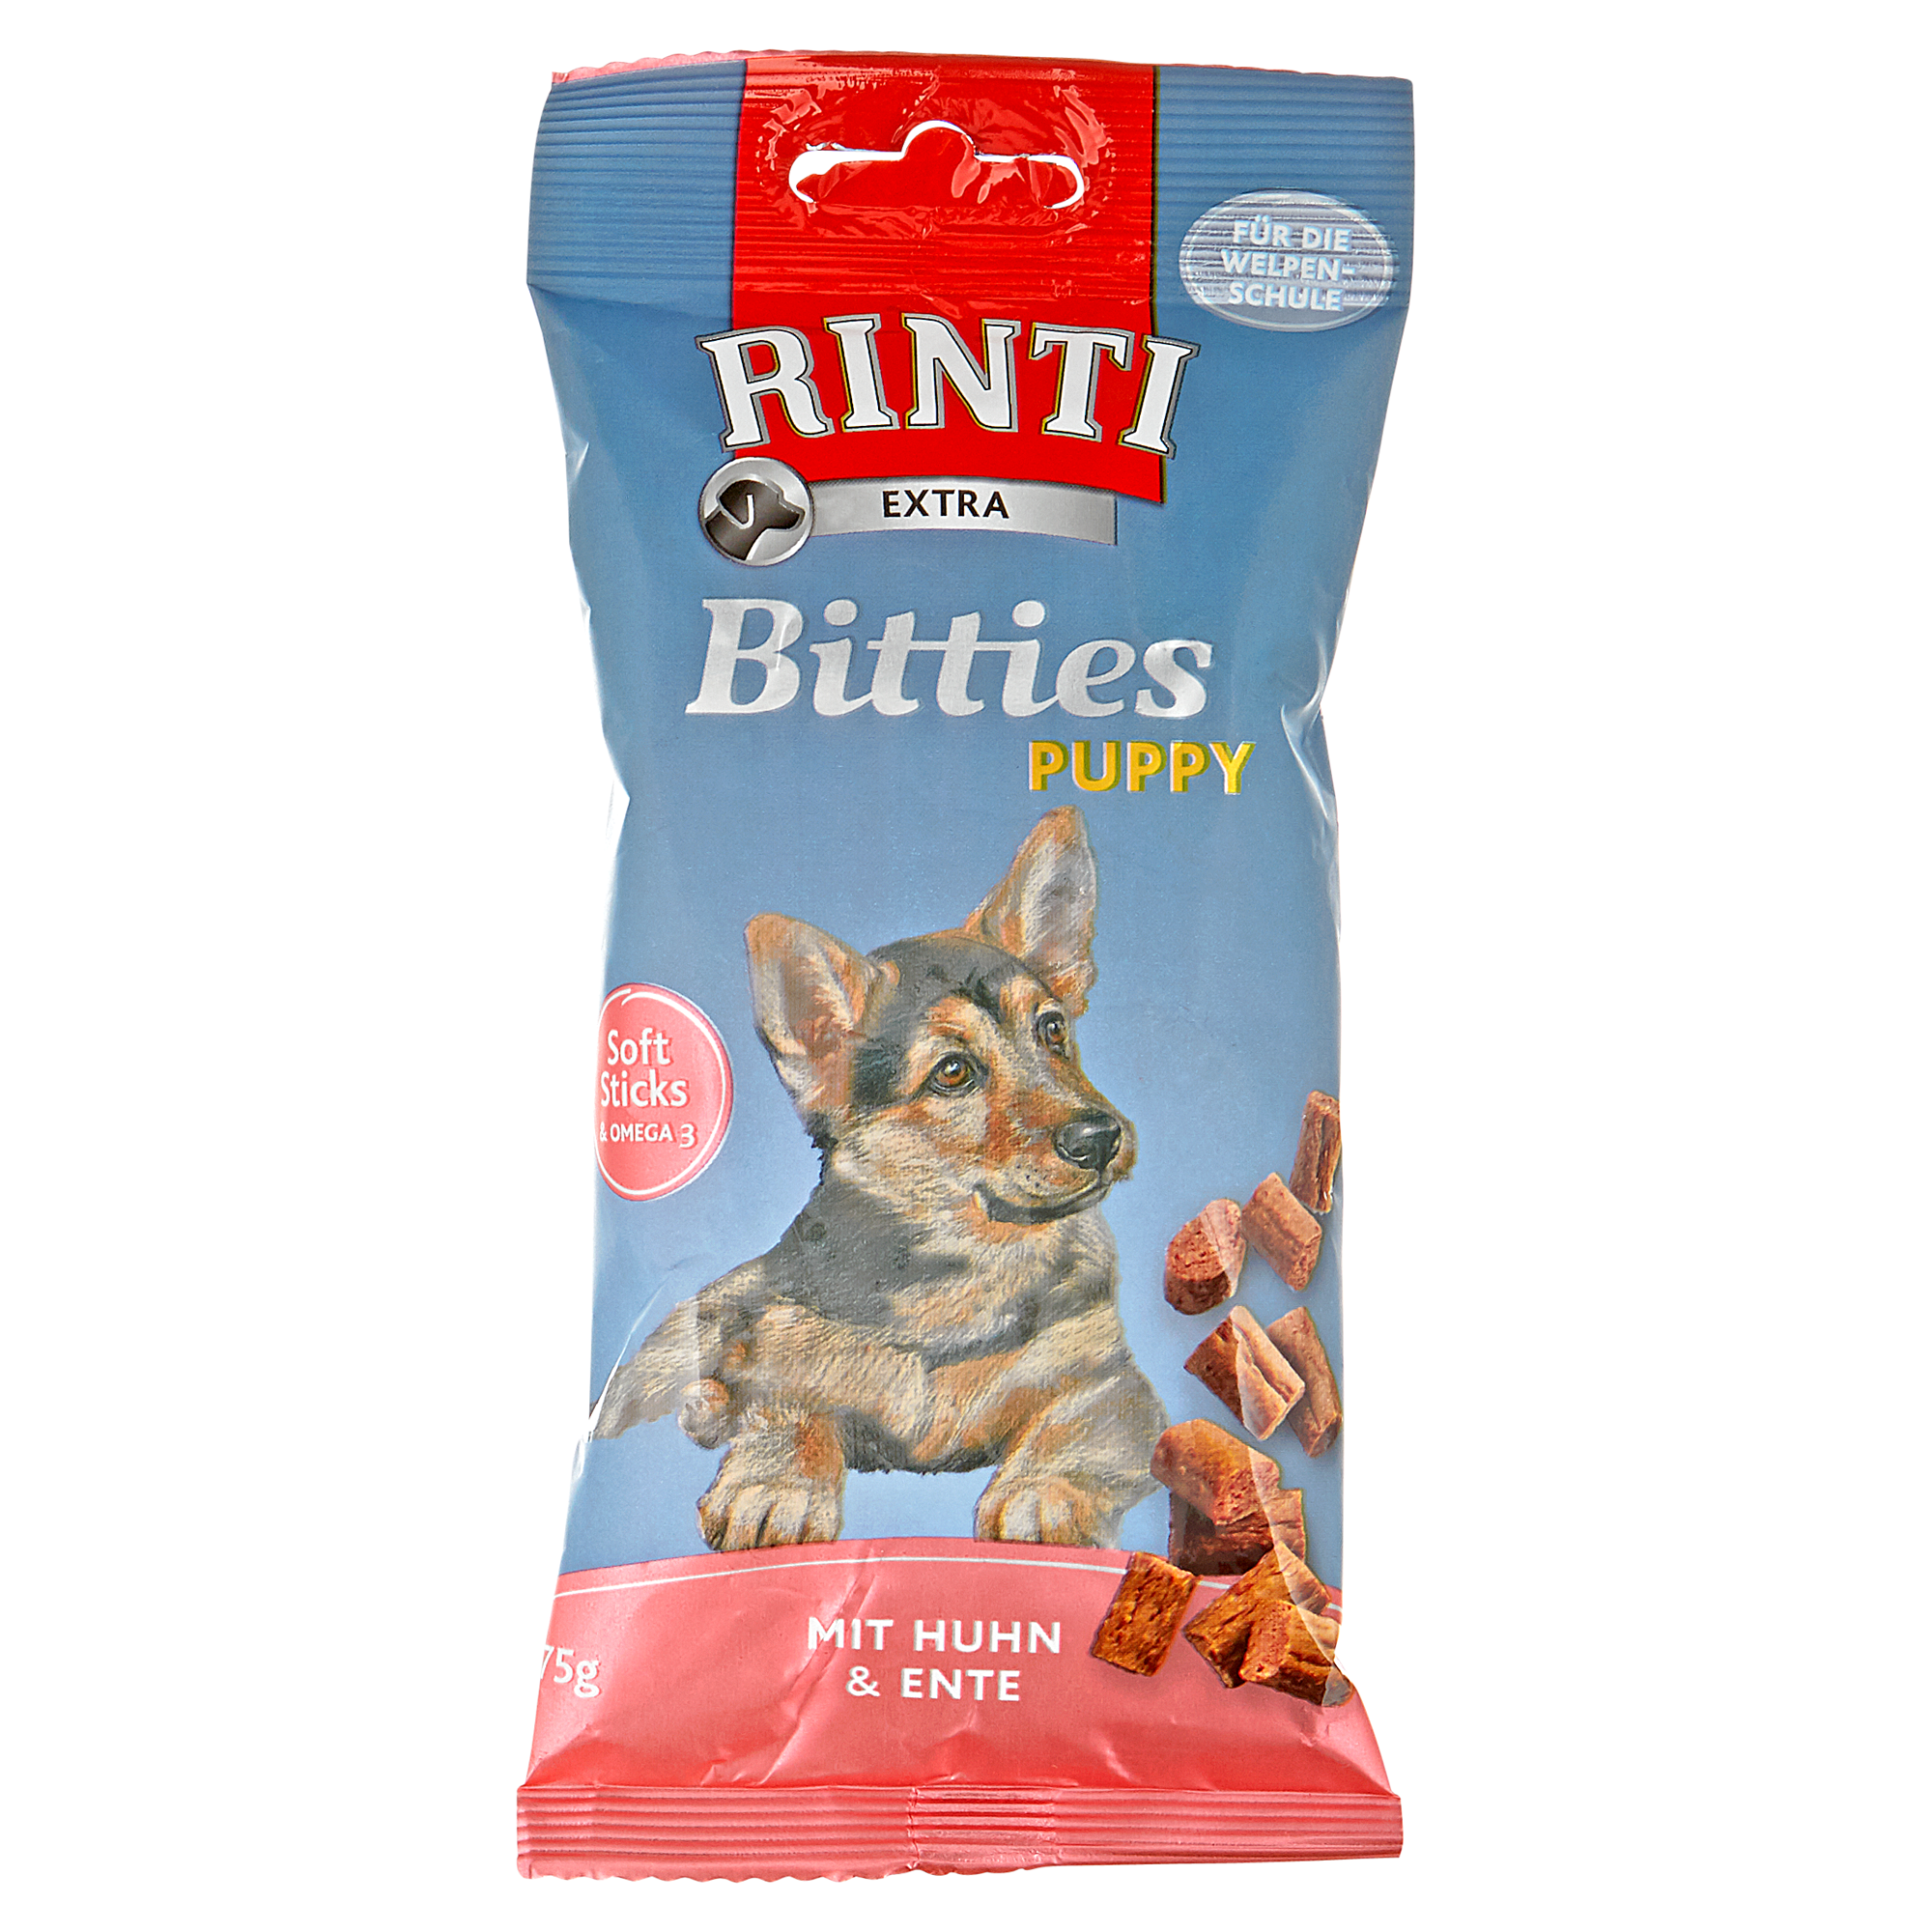 Hundesnacks "Bitties" Puppy mit Huhn/Ente 75 g + product picture